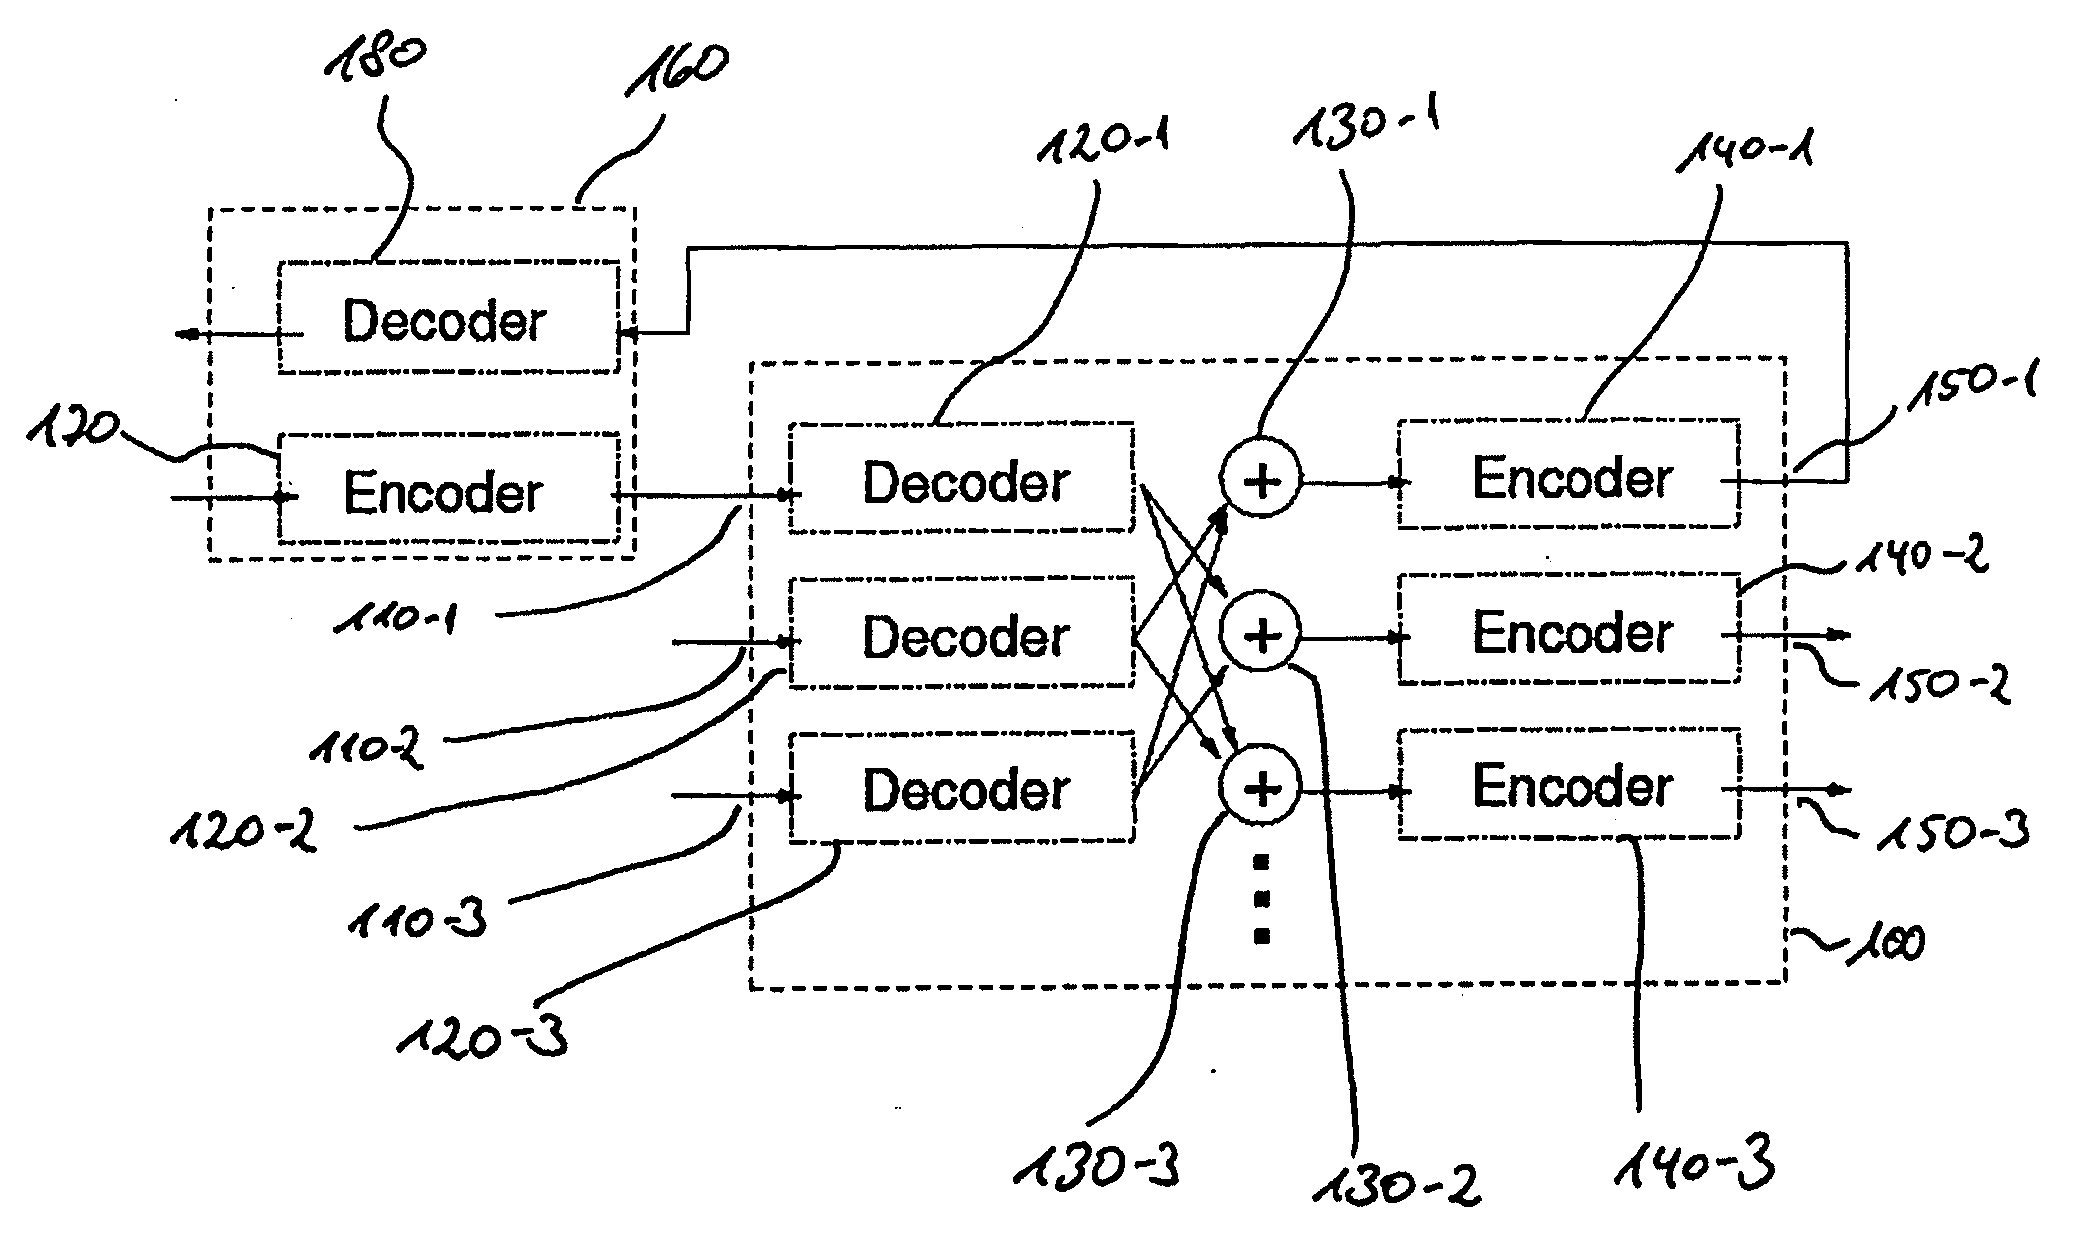 Apparatus for Mixing a Plurality of Input Data Streams